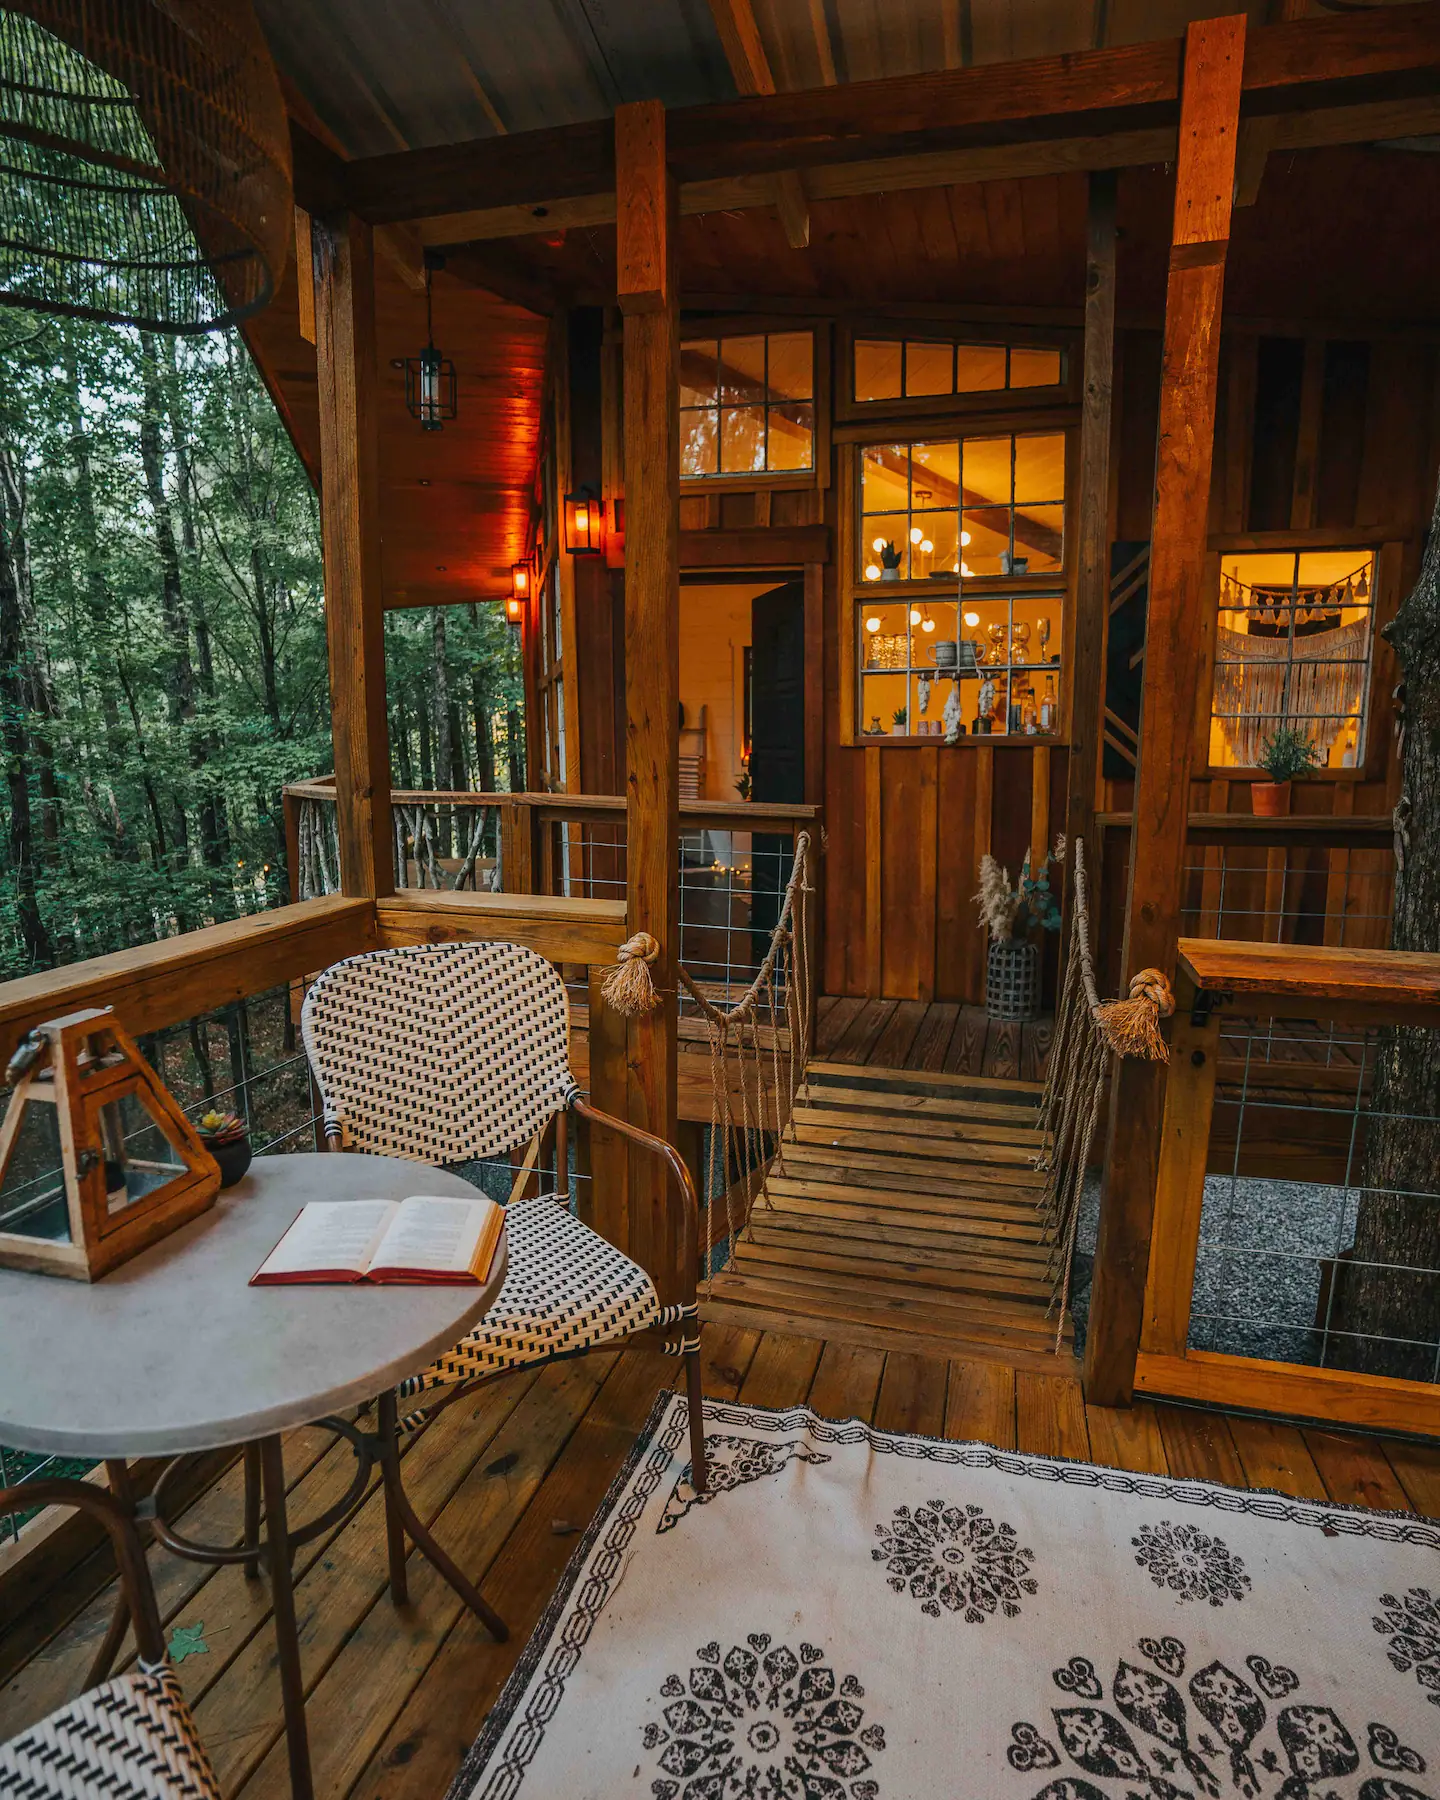 Sit and enjoy your morning coffee outside on the deck.